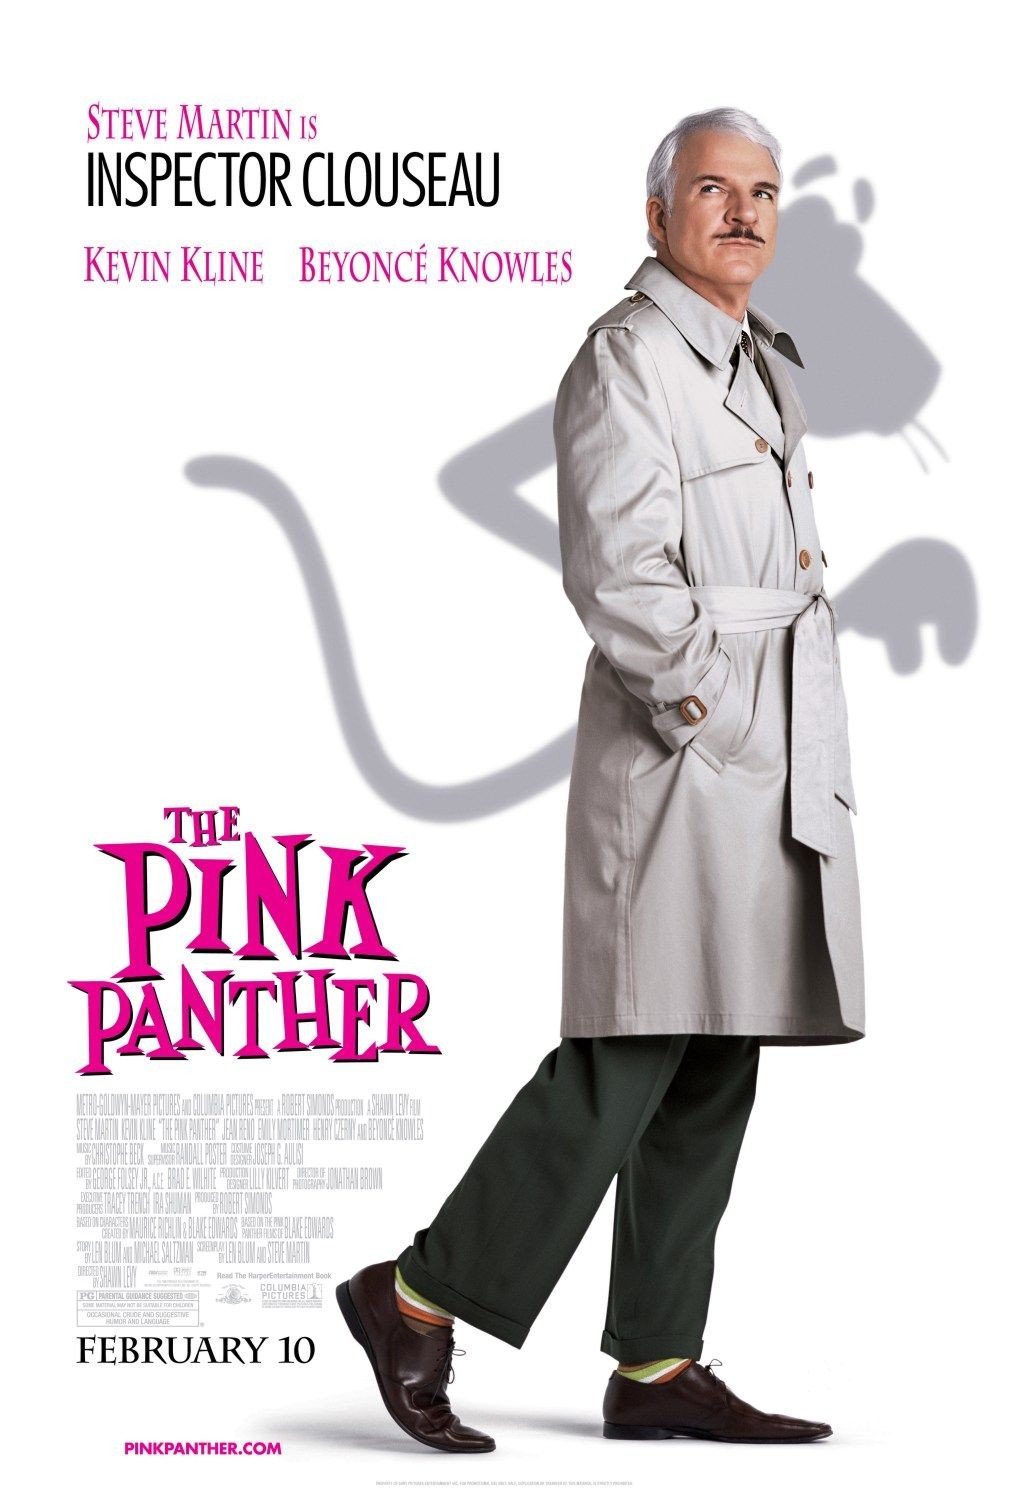 http://s6.picofile.com/file/8209264450/pink_panther.jpg